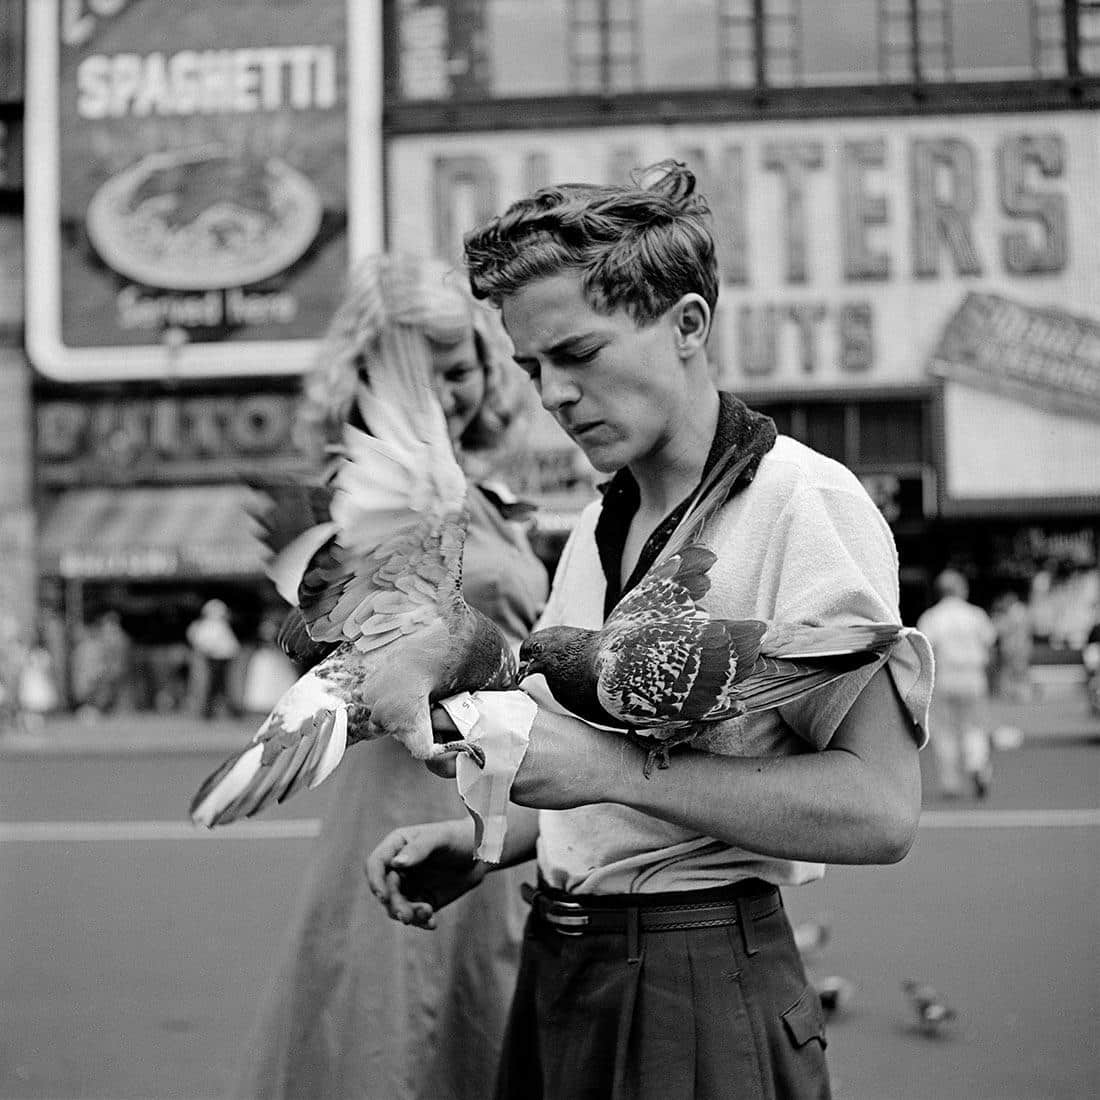 8 Clues to Better Street Photography in the Works of Vivian Maier